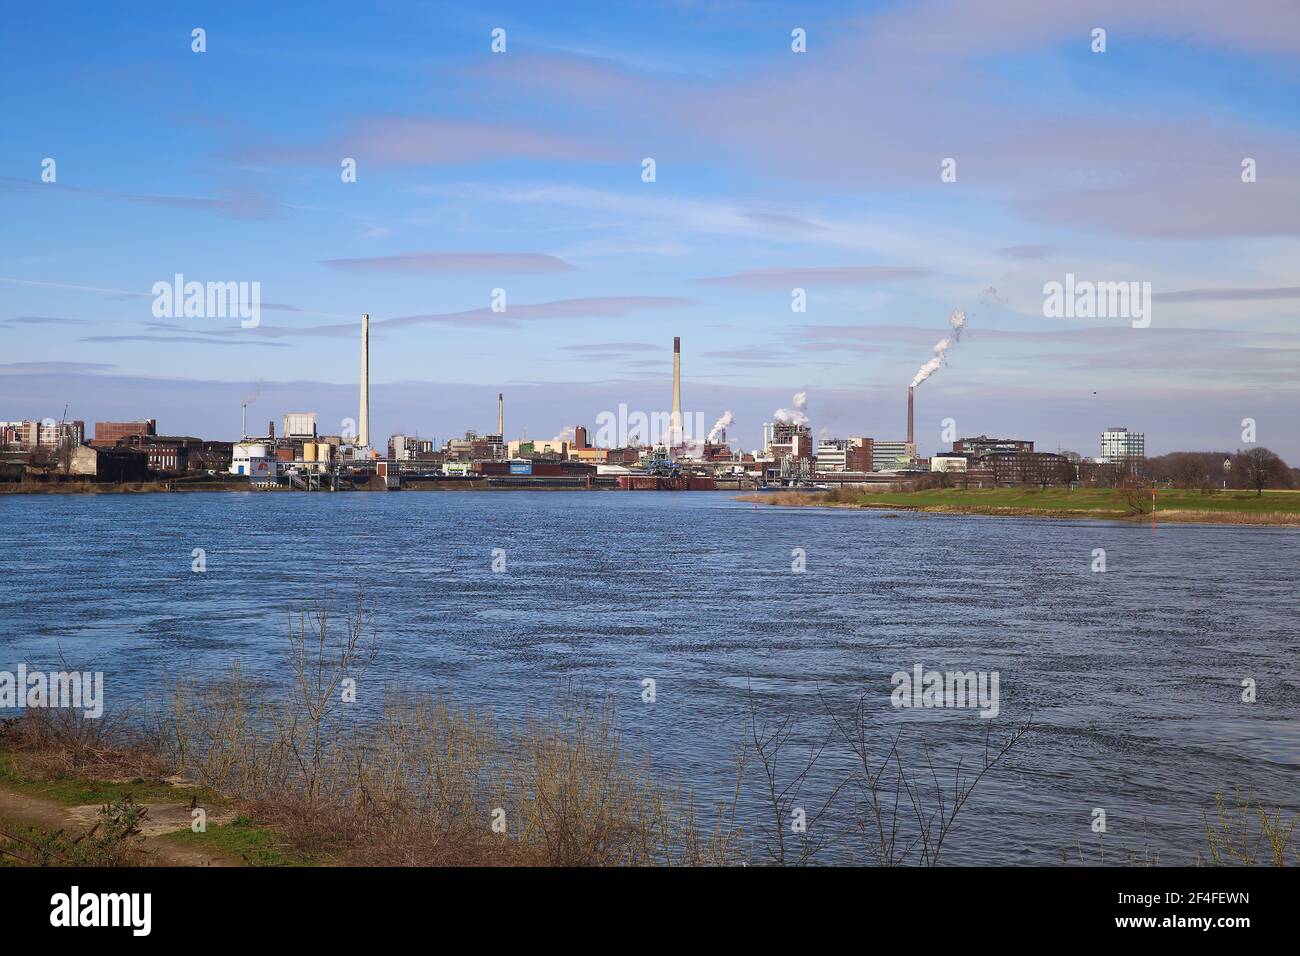 Krefeld (Uerdingen) - March 1. 2021:  View over river rhine on  industrial area with factories and chimneys against blue sky Stock Photo